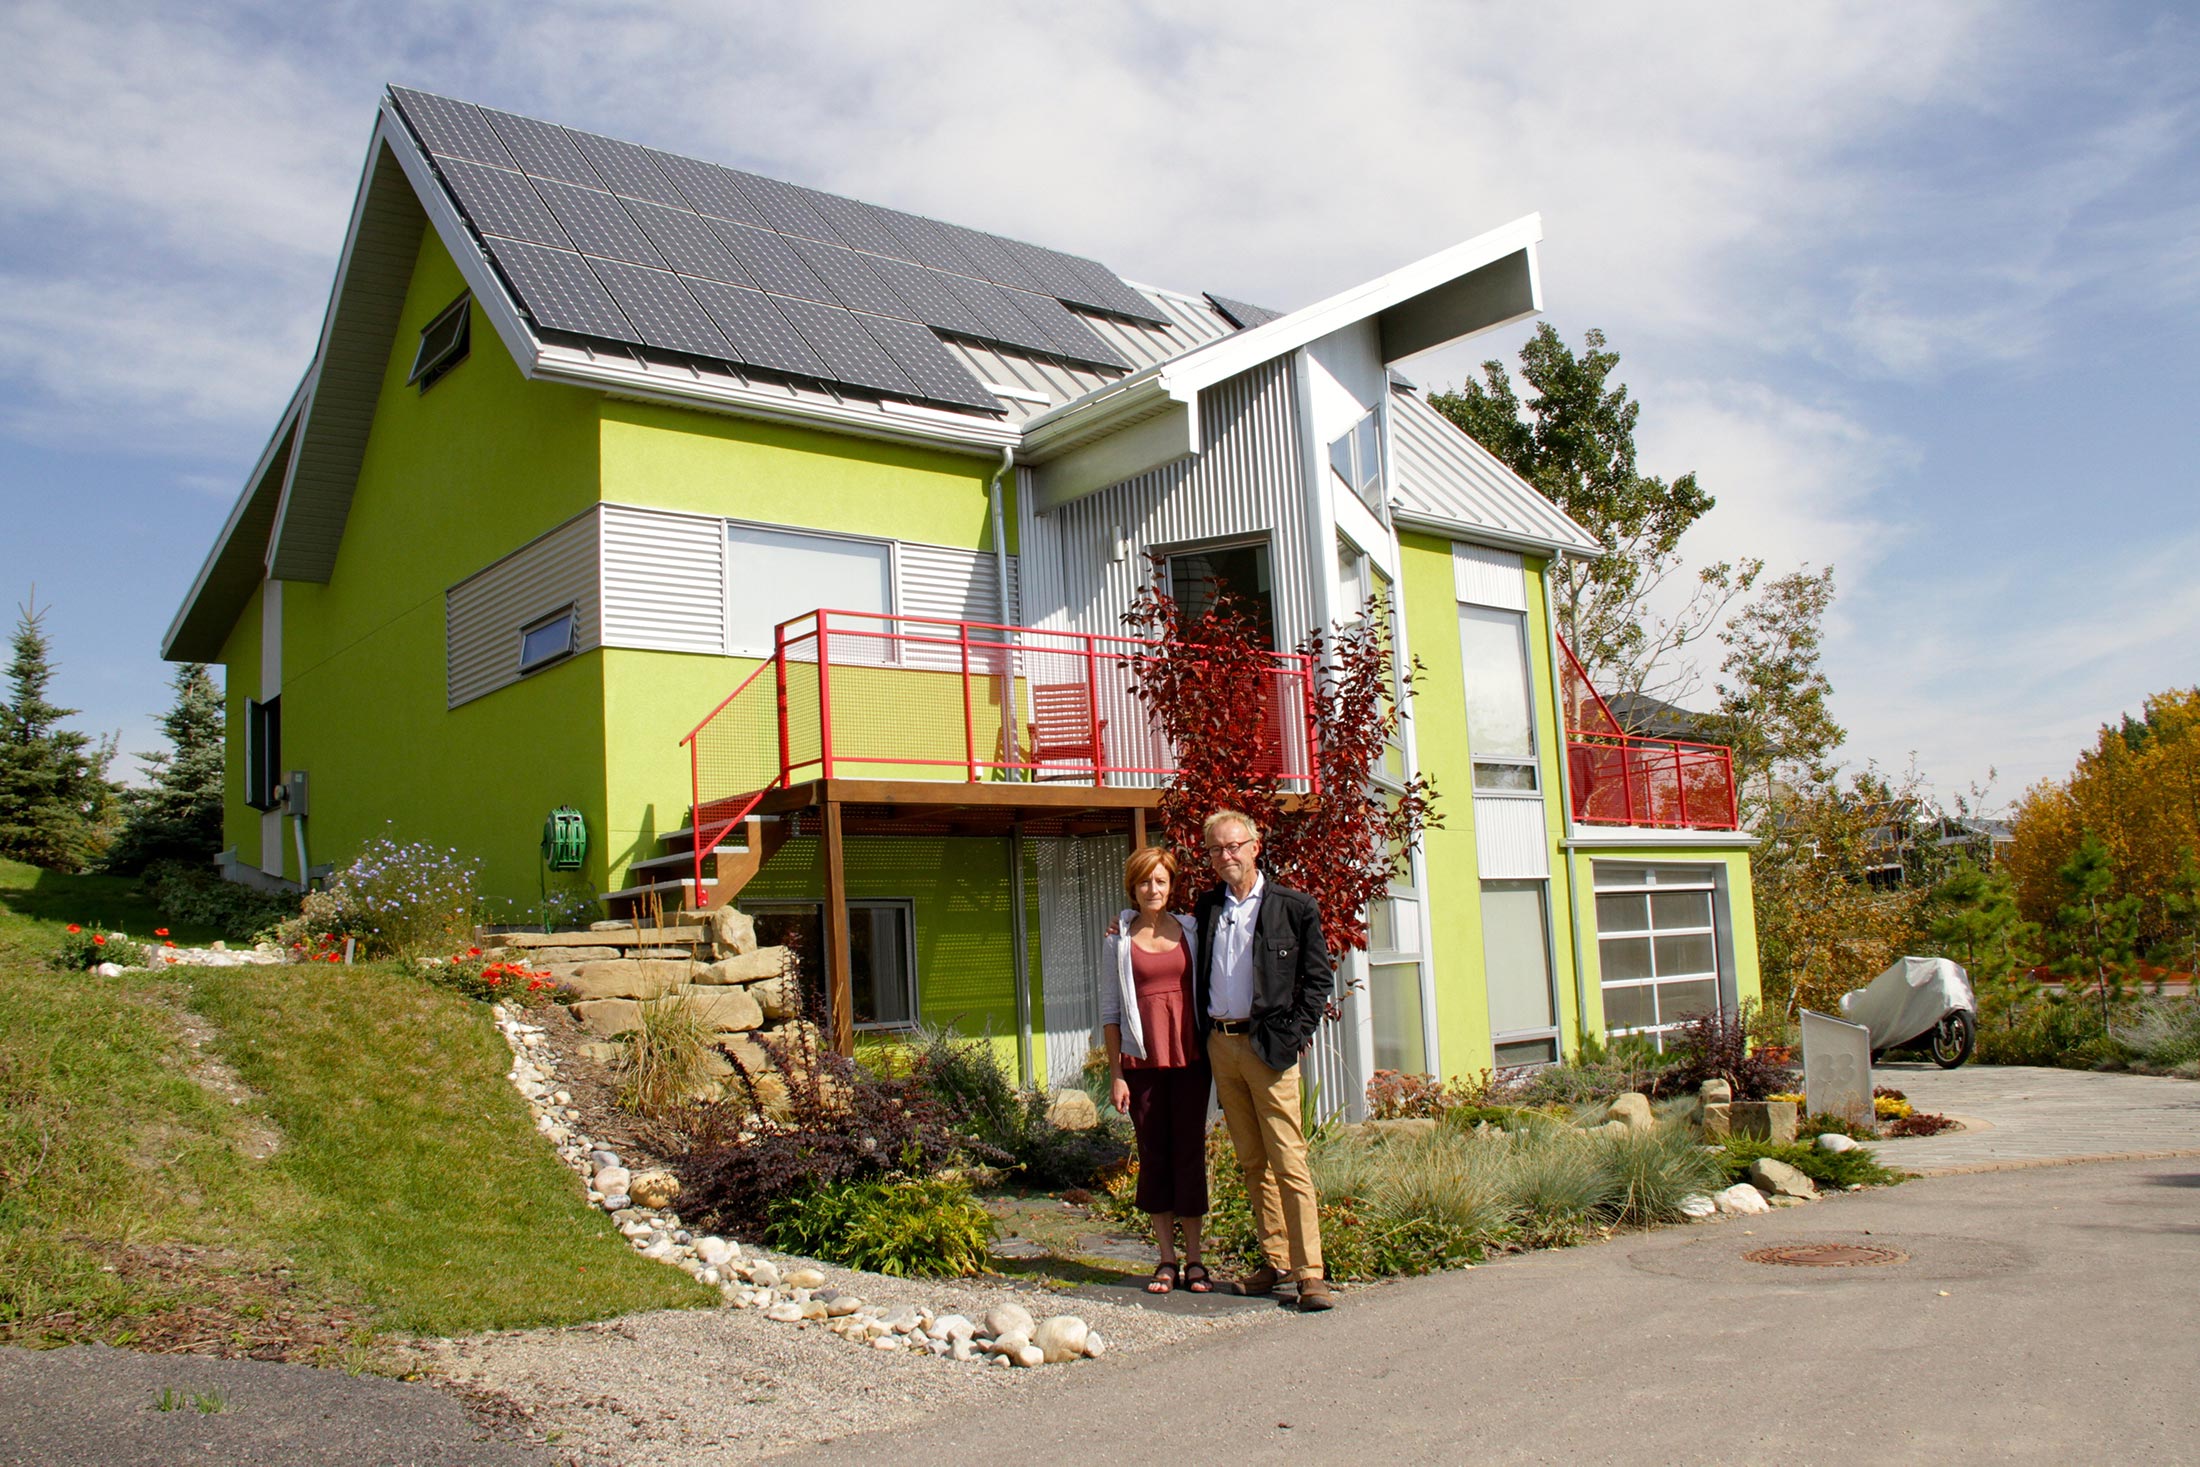 Homeowners stand in front of their solar powered home. © David Dodge, made available under a Creative Commons 2.0 license.